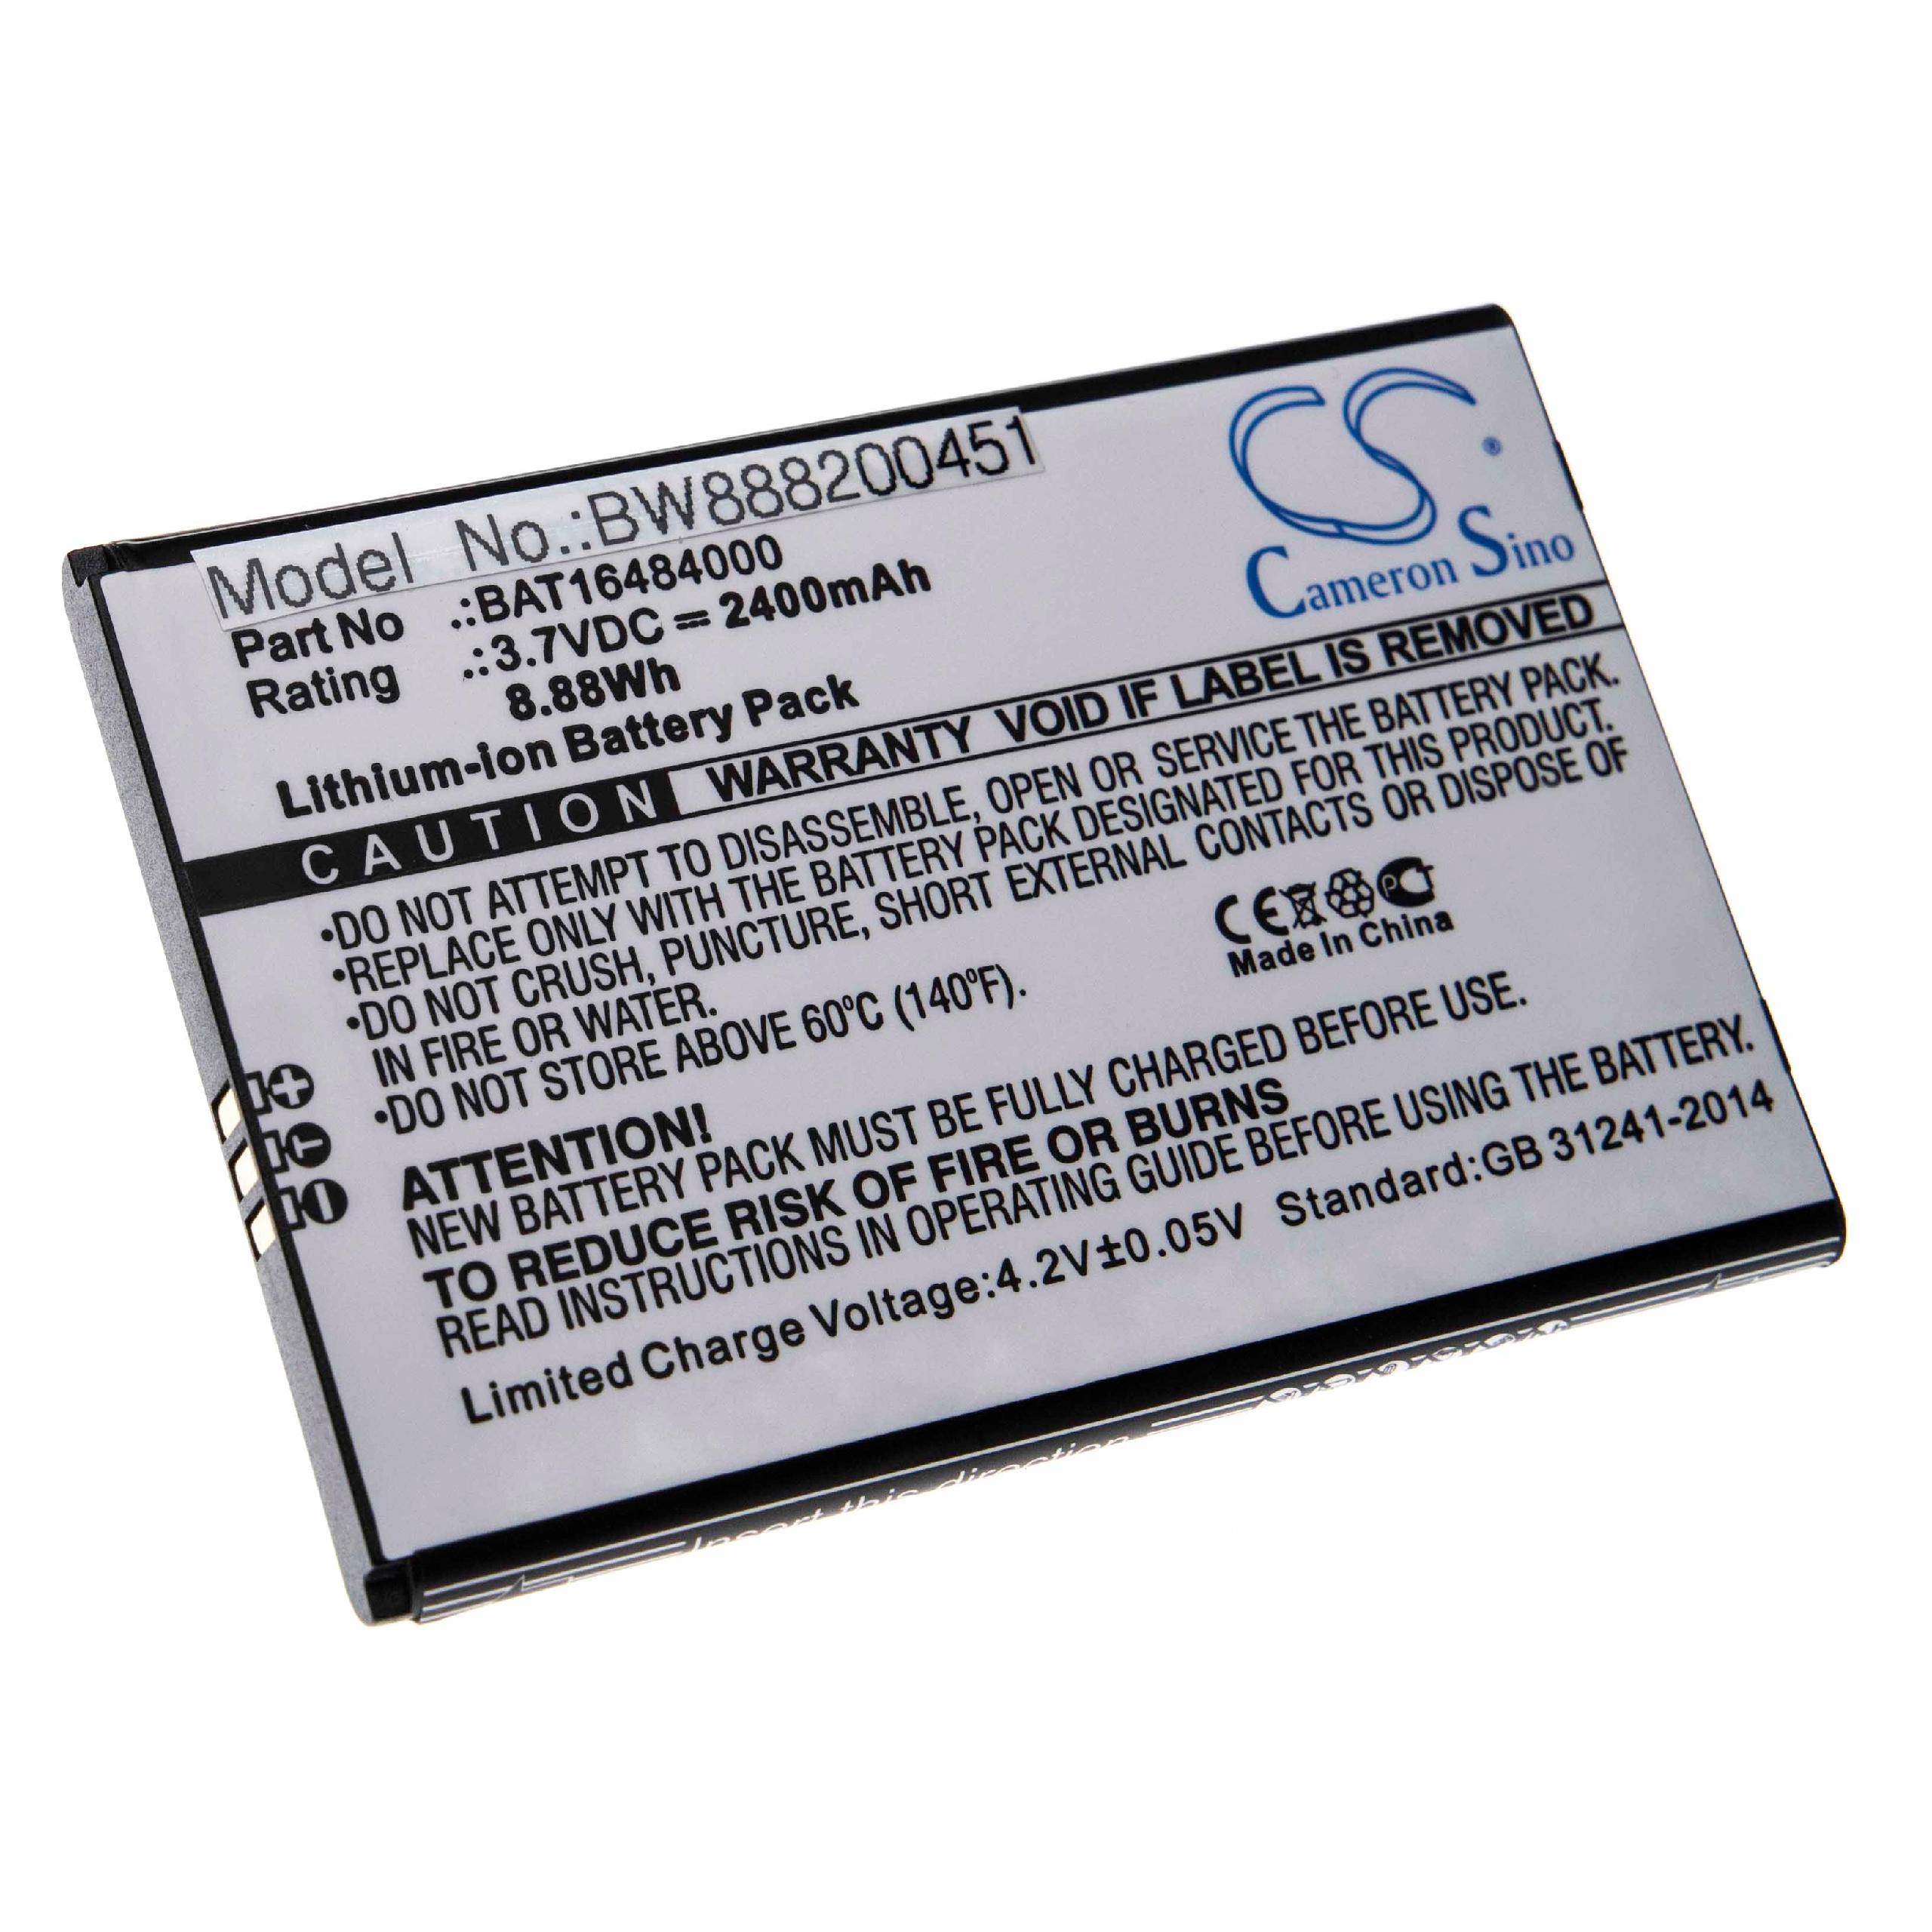 Mobile Phone Battery Replacement for Doogee BAT16484000 - 2400mAh 3.7V Li-Ion